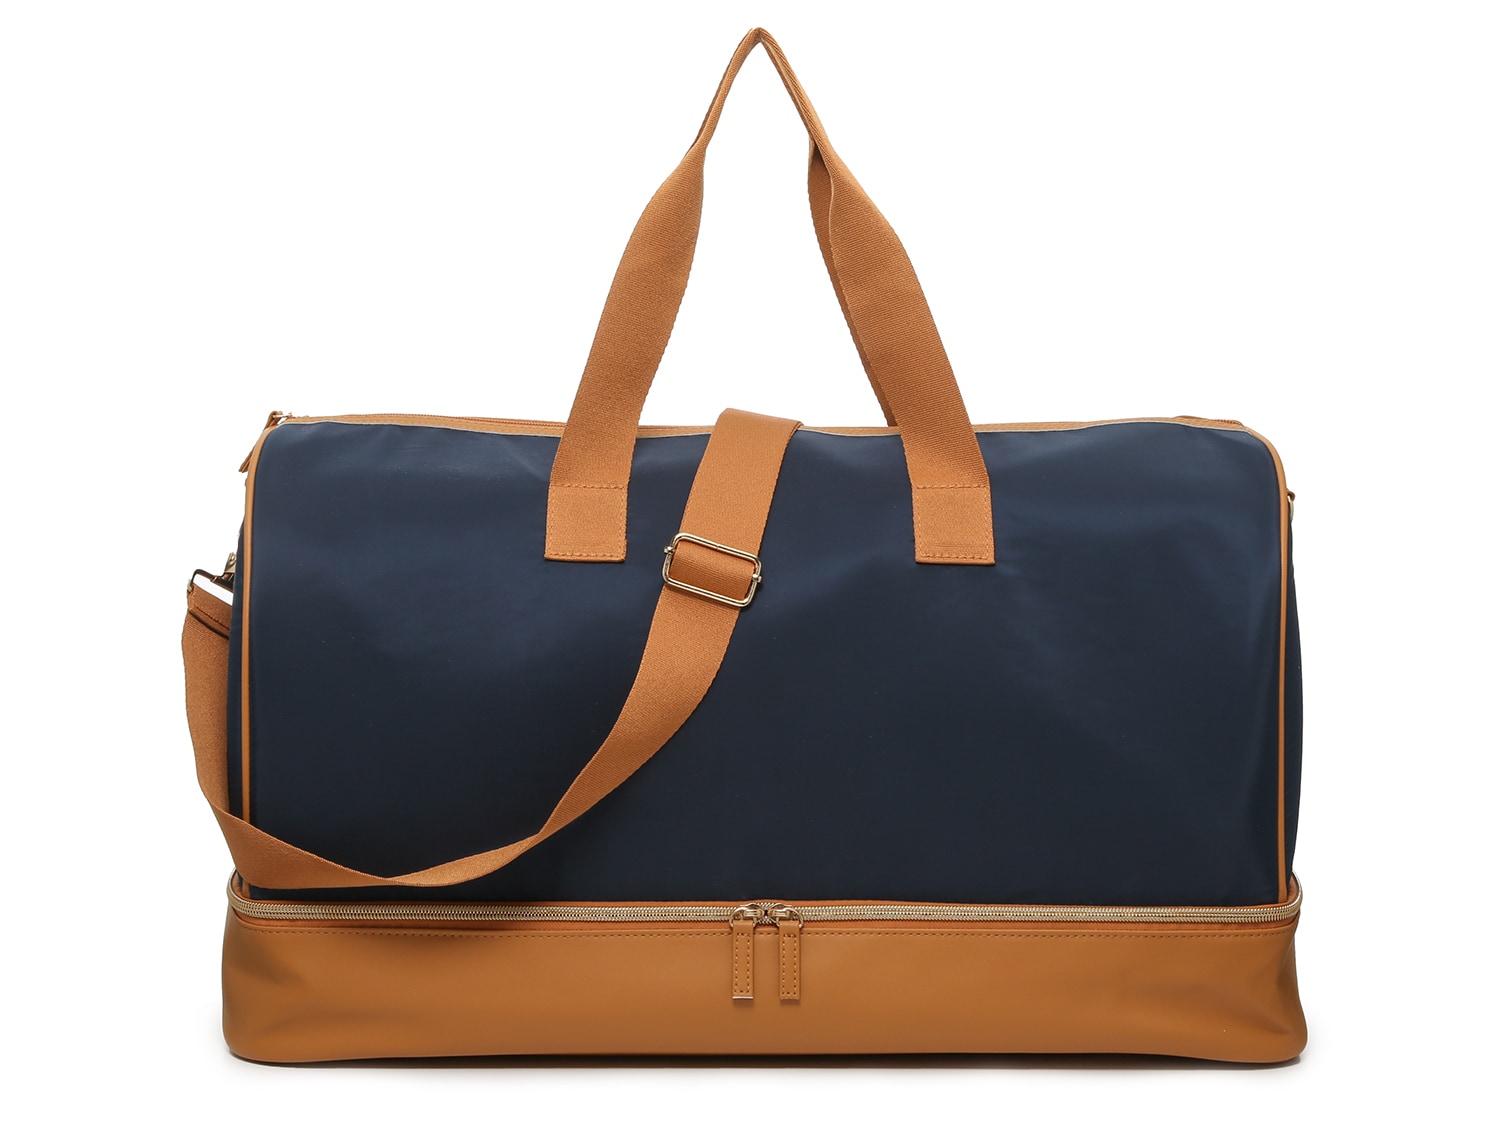 DSW Exclusive Free Weekender Bag - Free Shipping | DSW